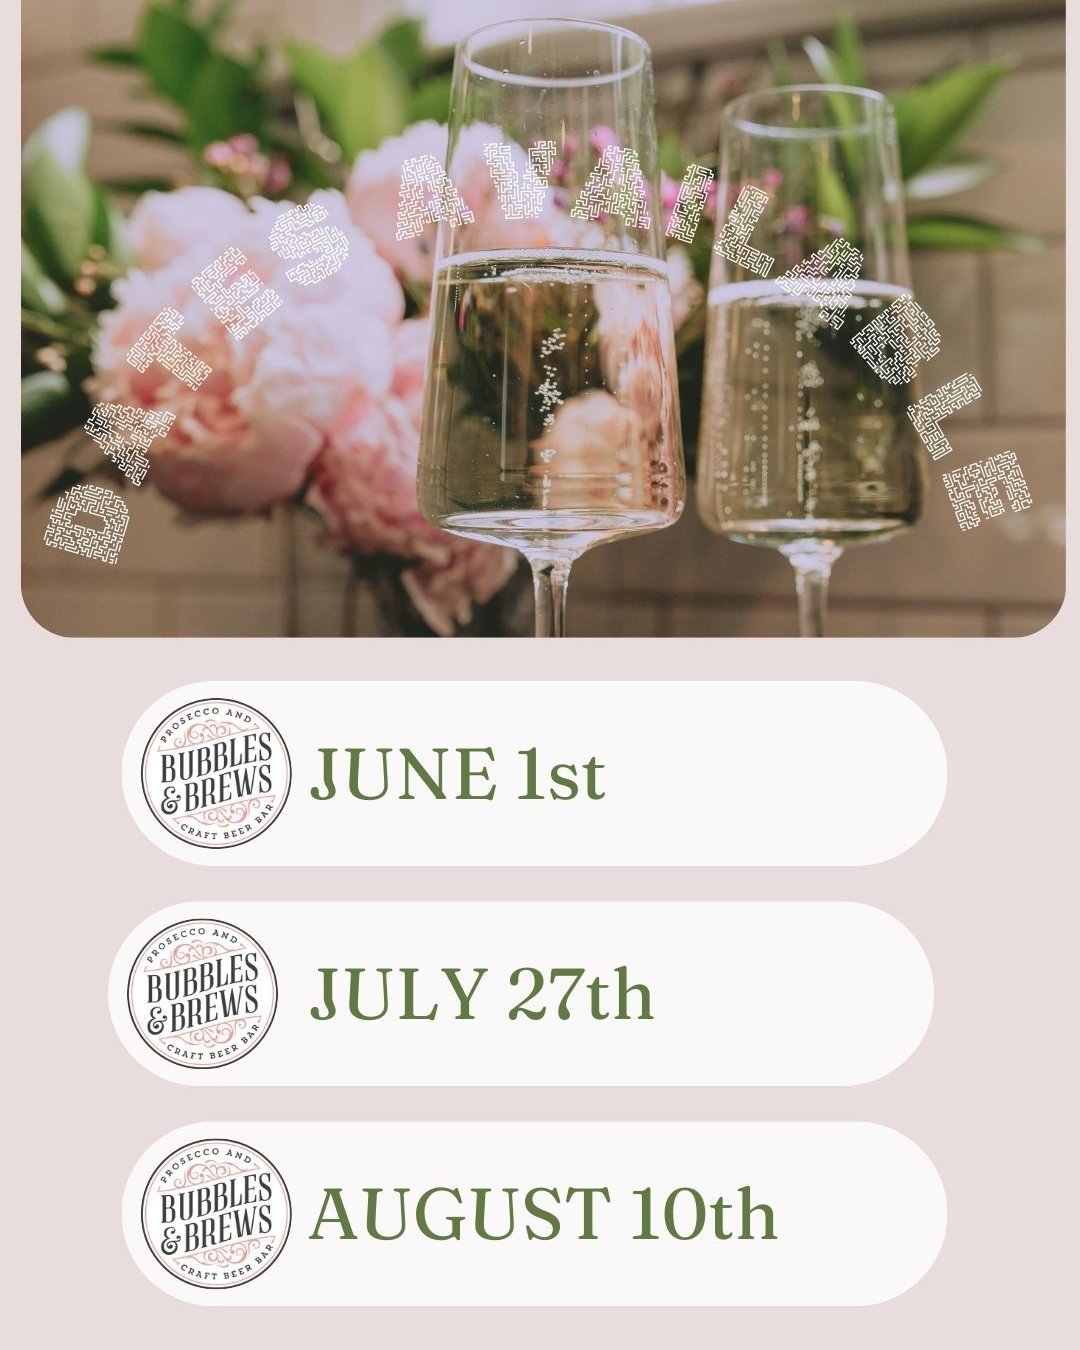 Dates available for last-minute summer bookings! #pippathepiaggo #summerweddings #mobilebar